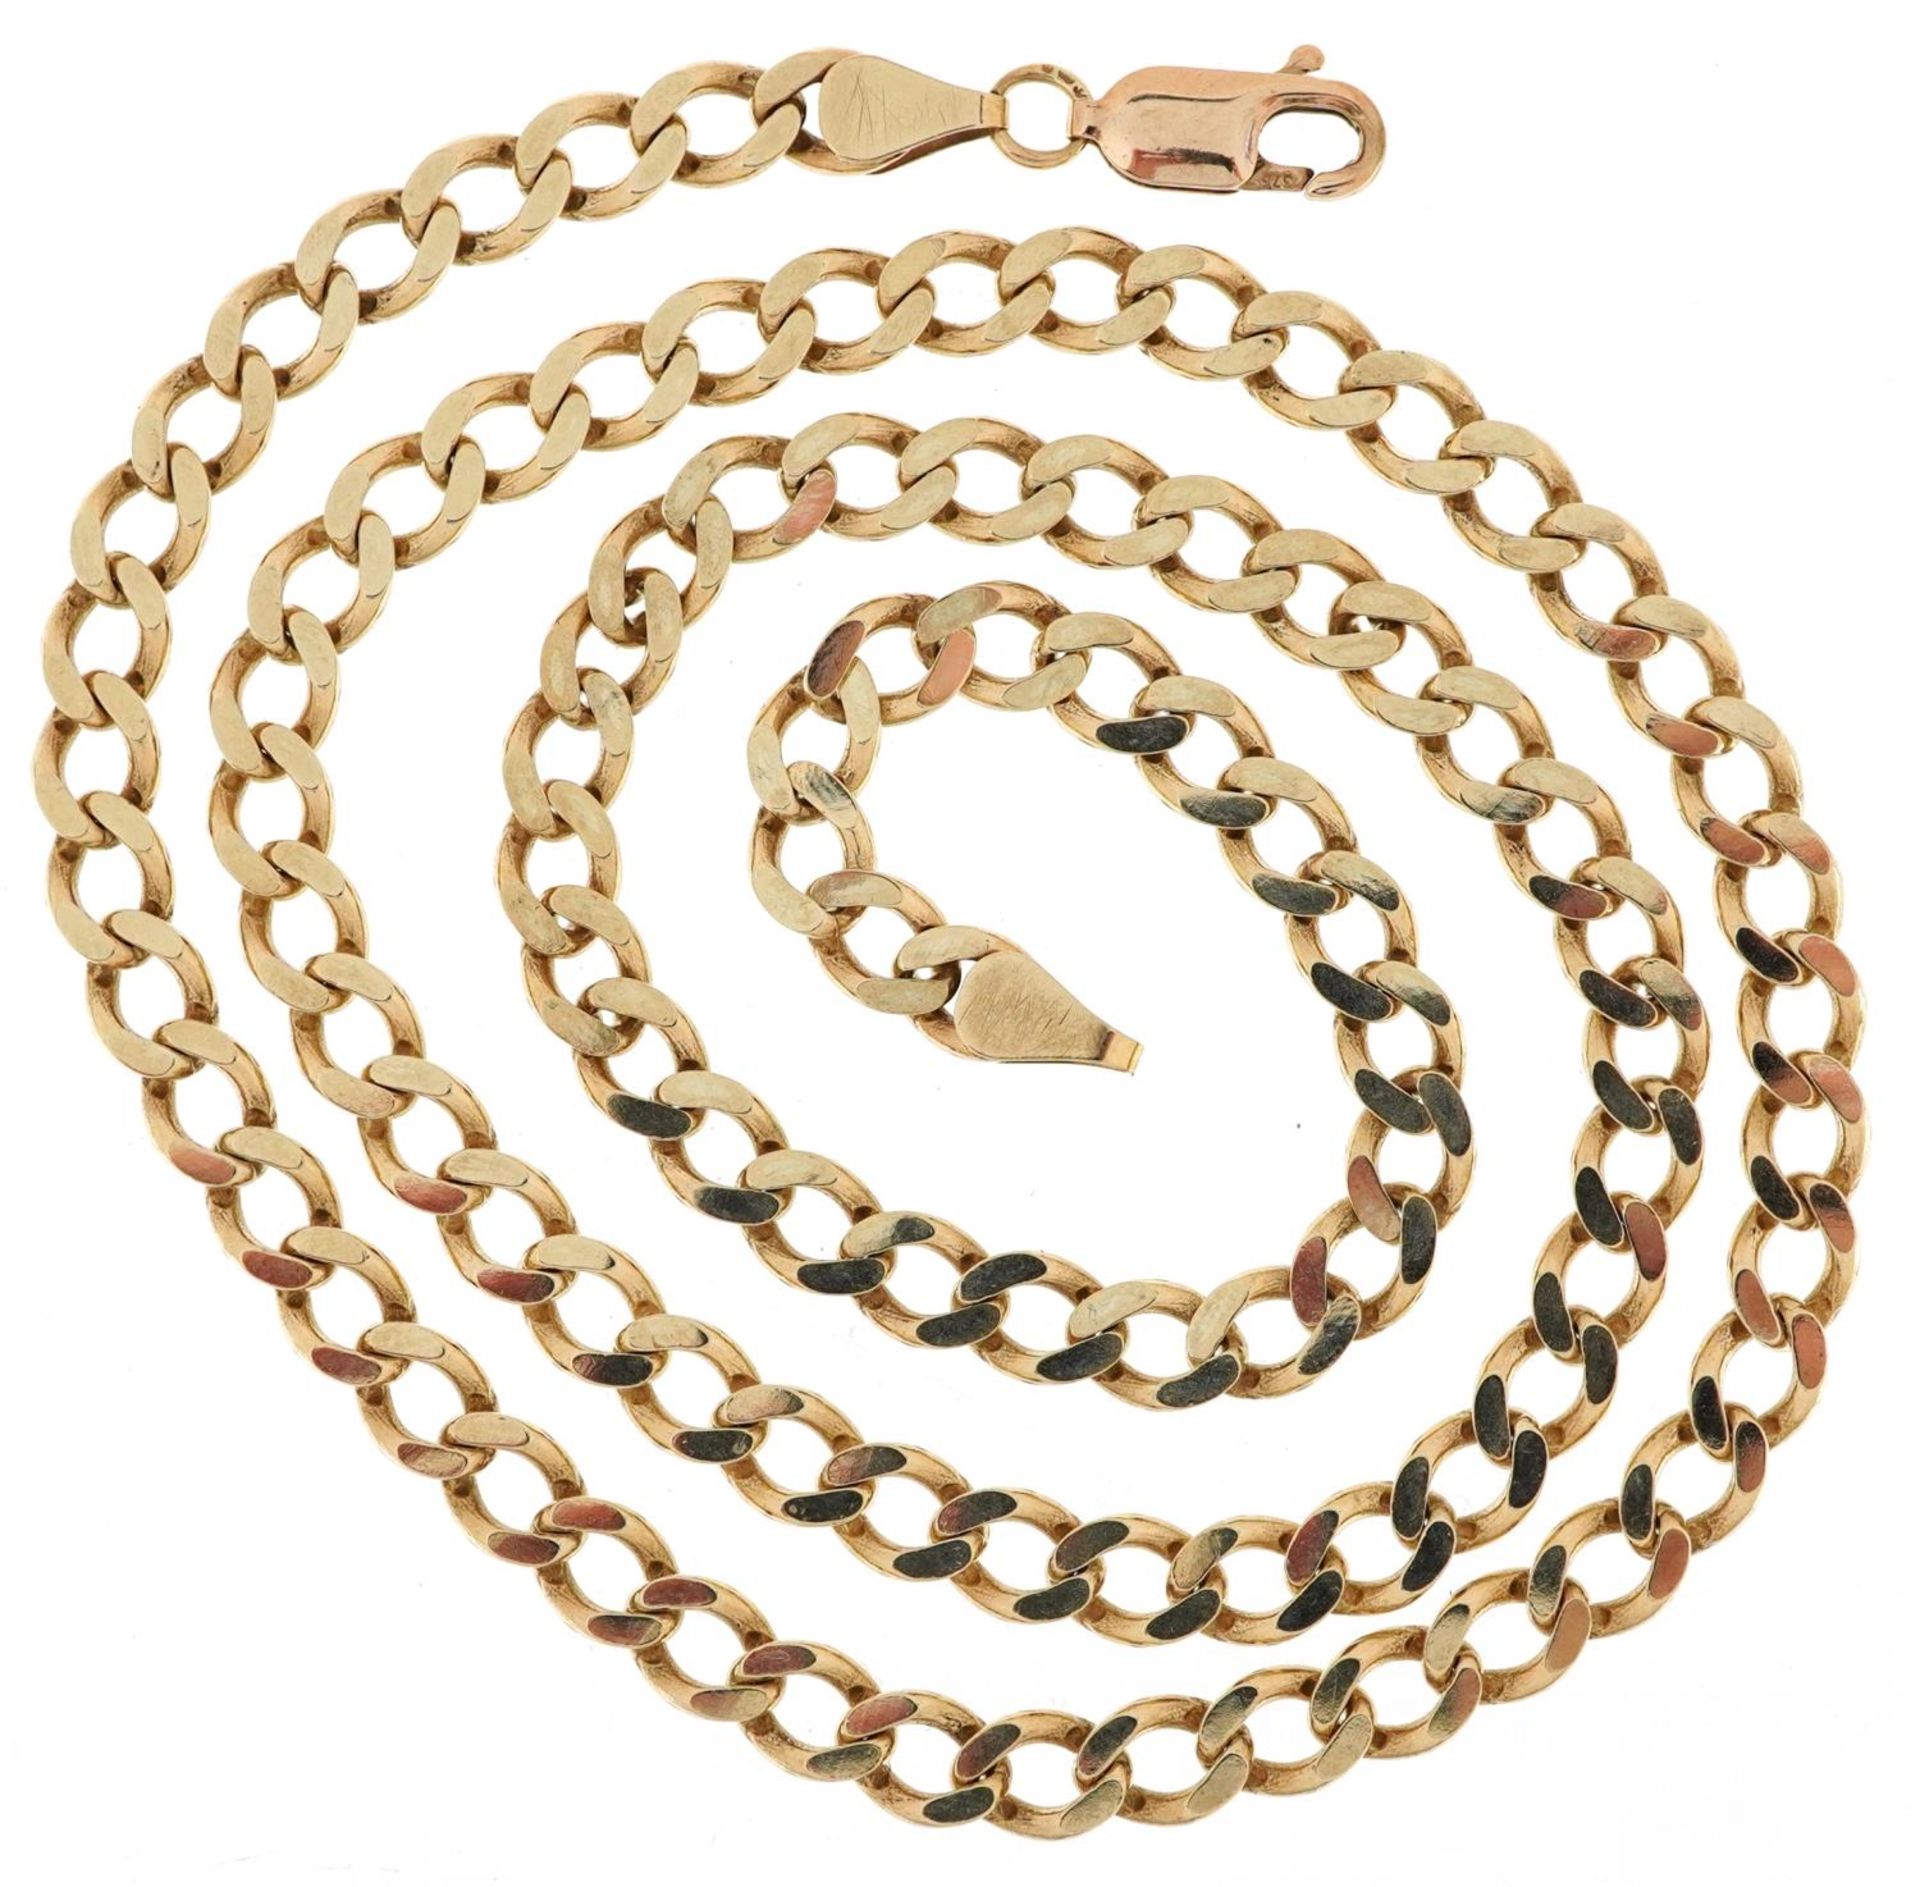 9ct gold curb link necklace, 54cm in length, 29.5g - Image 2 of 4